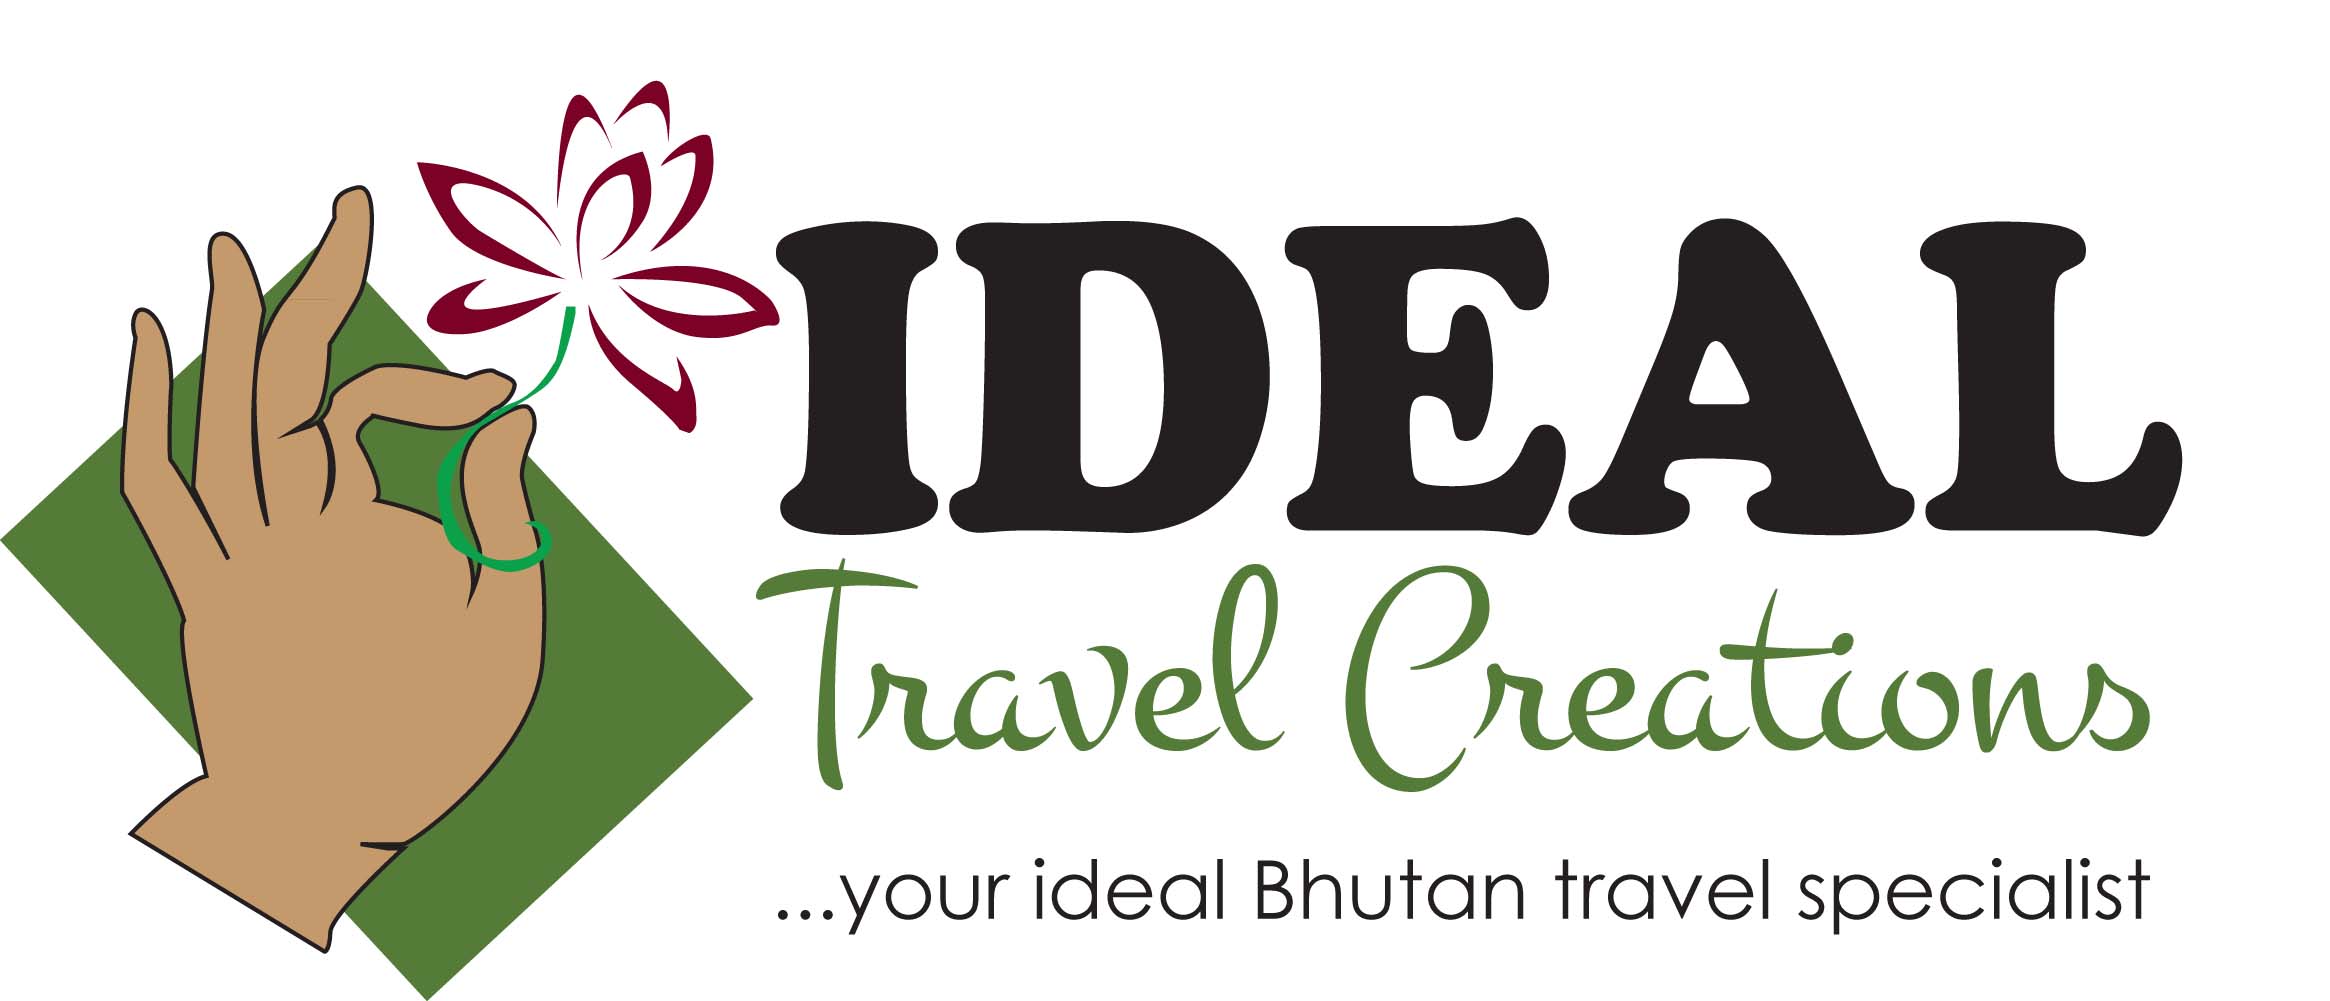 Ideal Travel Creations